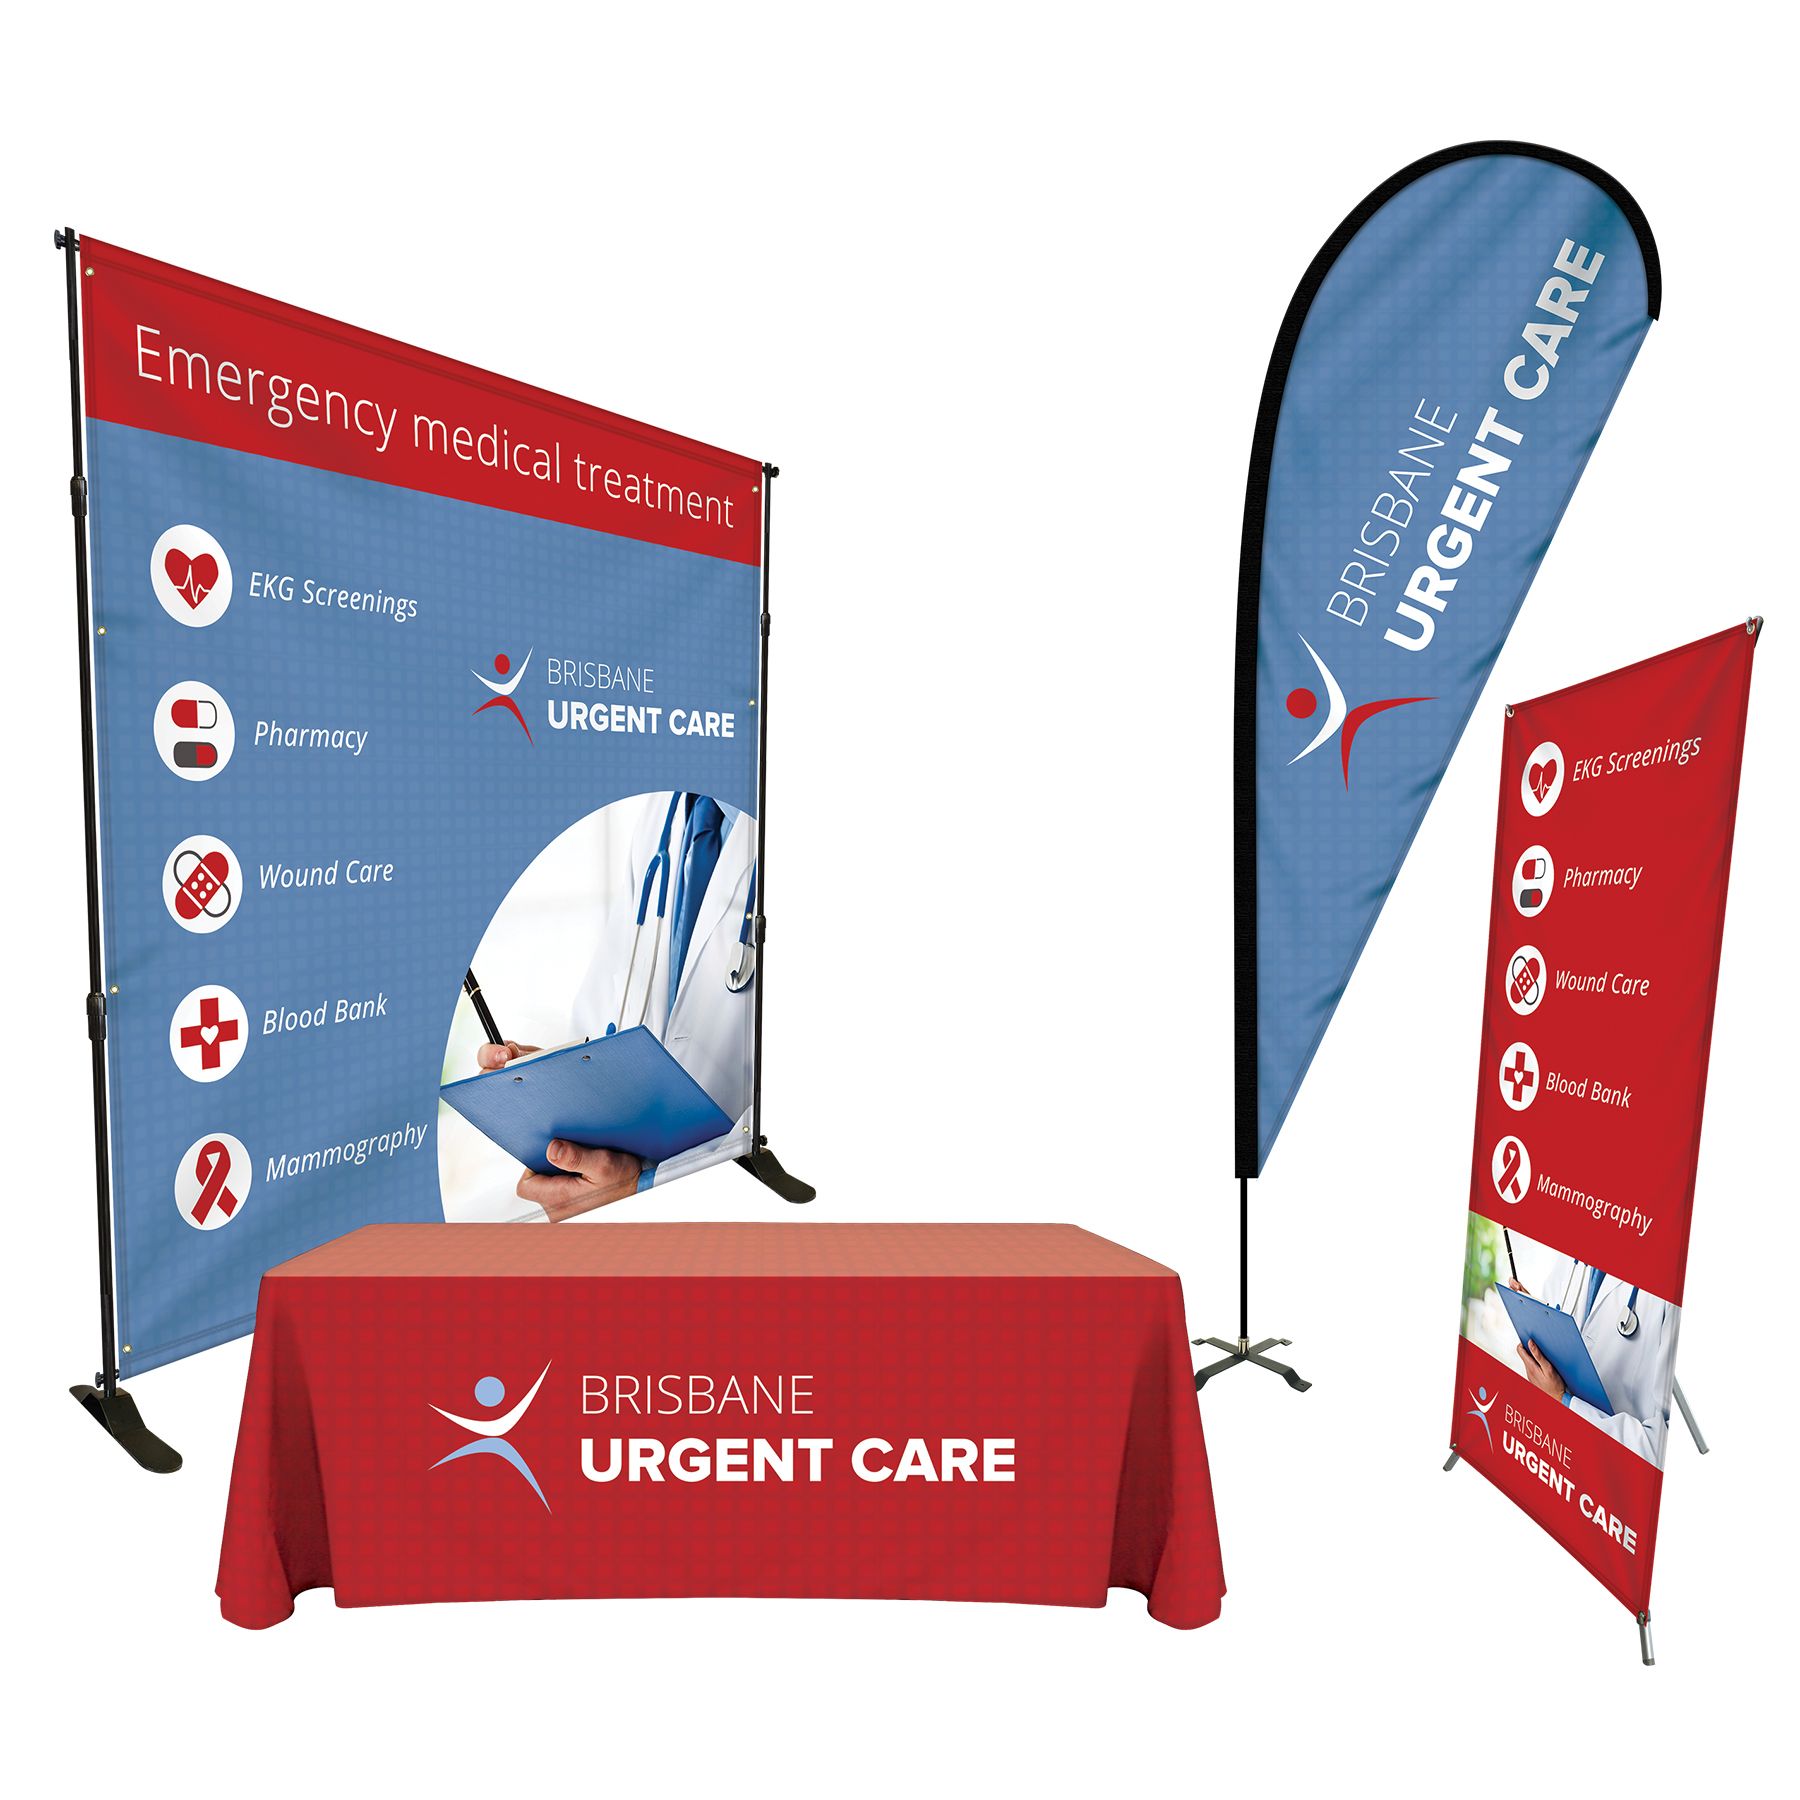 Trade Show Booth Display - Basic Package - Banners, Displays, Table Covers